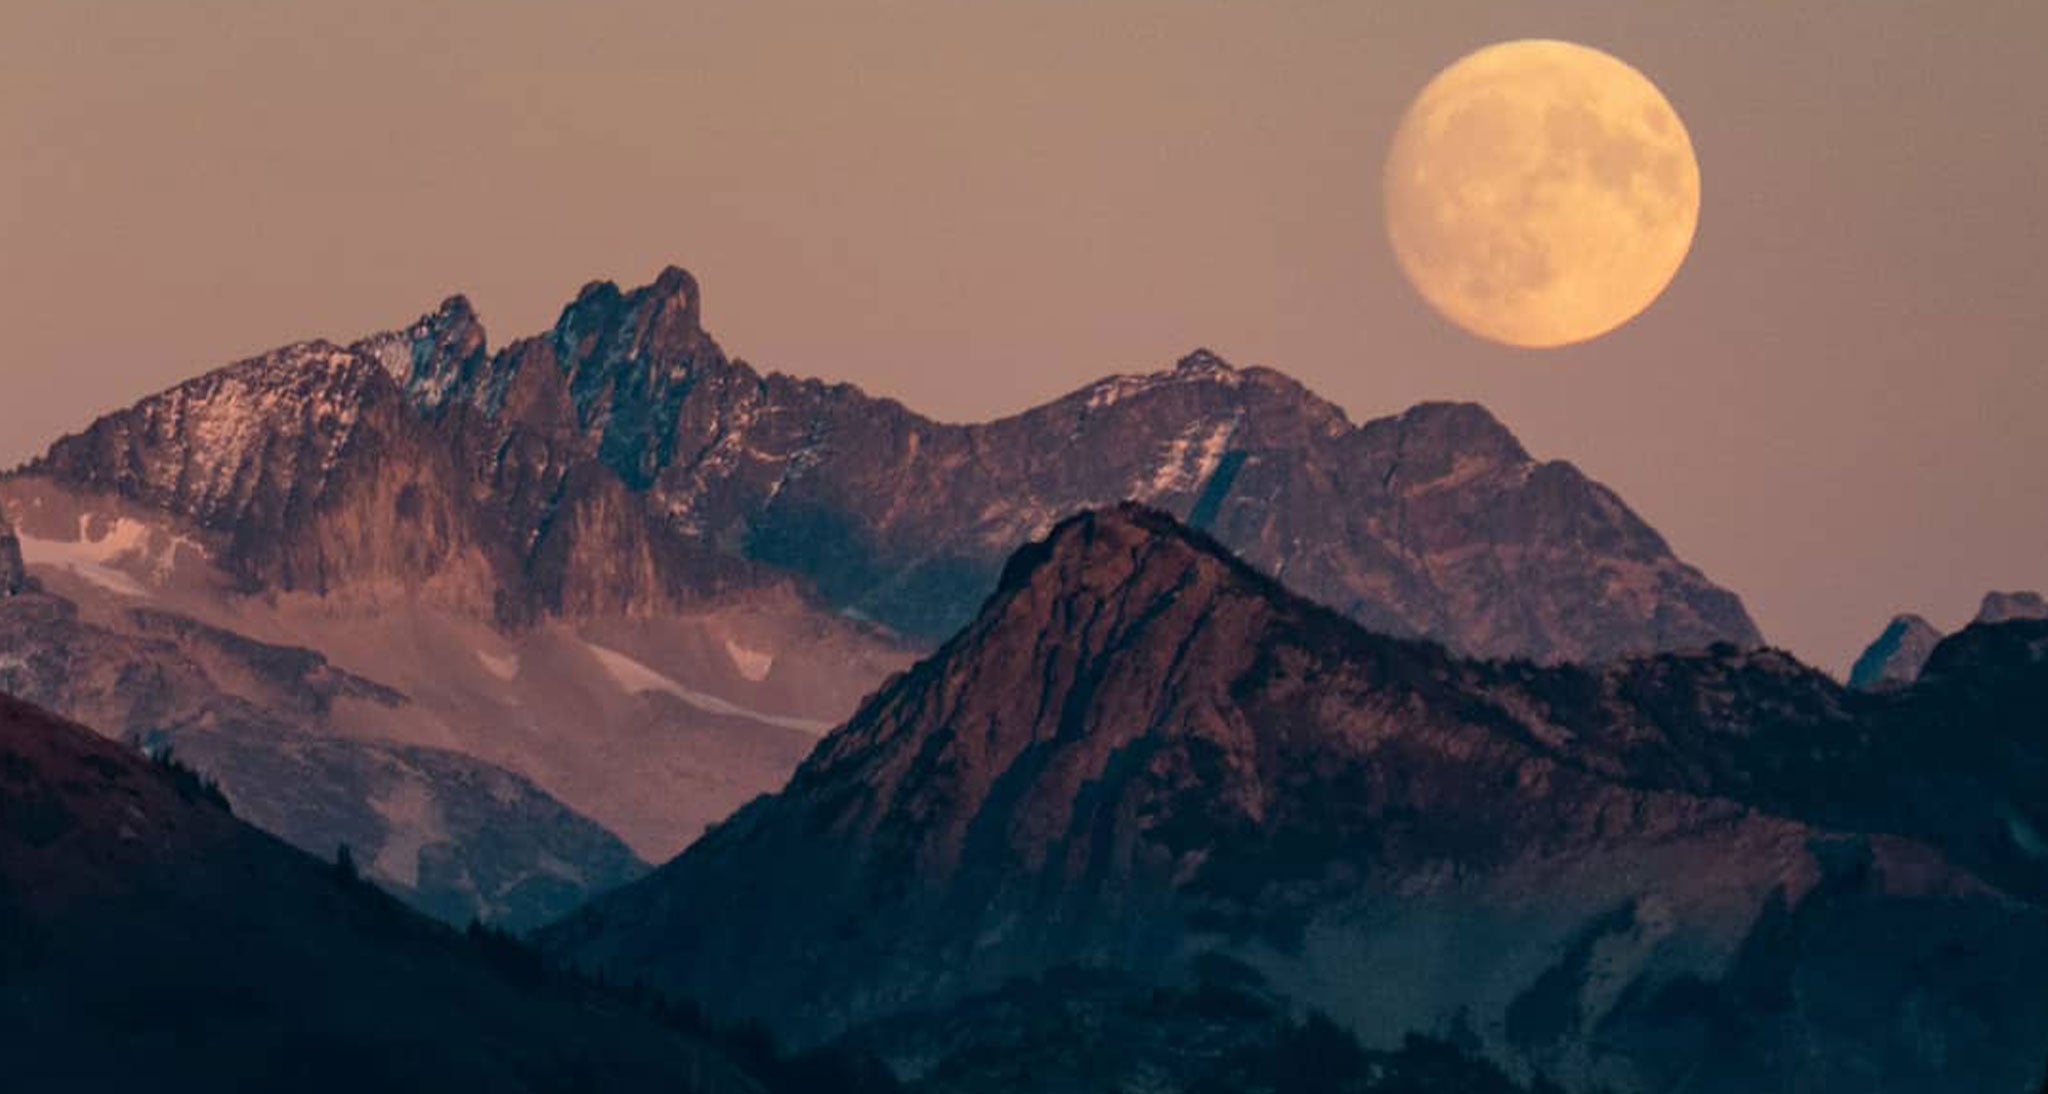 Moonrise over the mountains